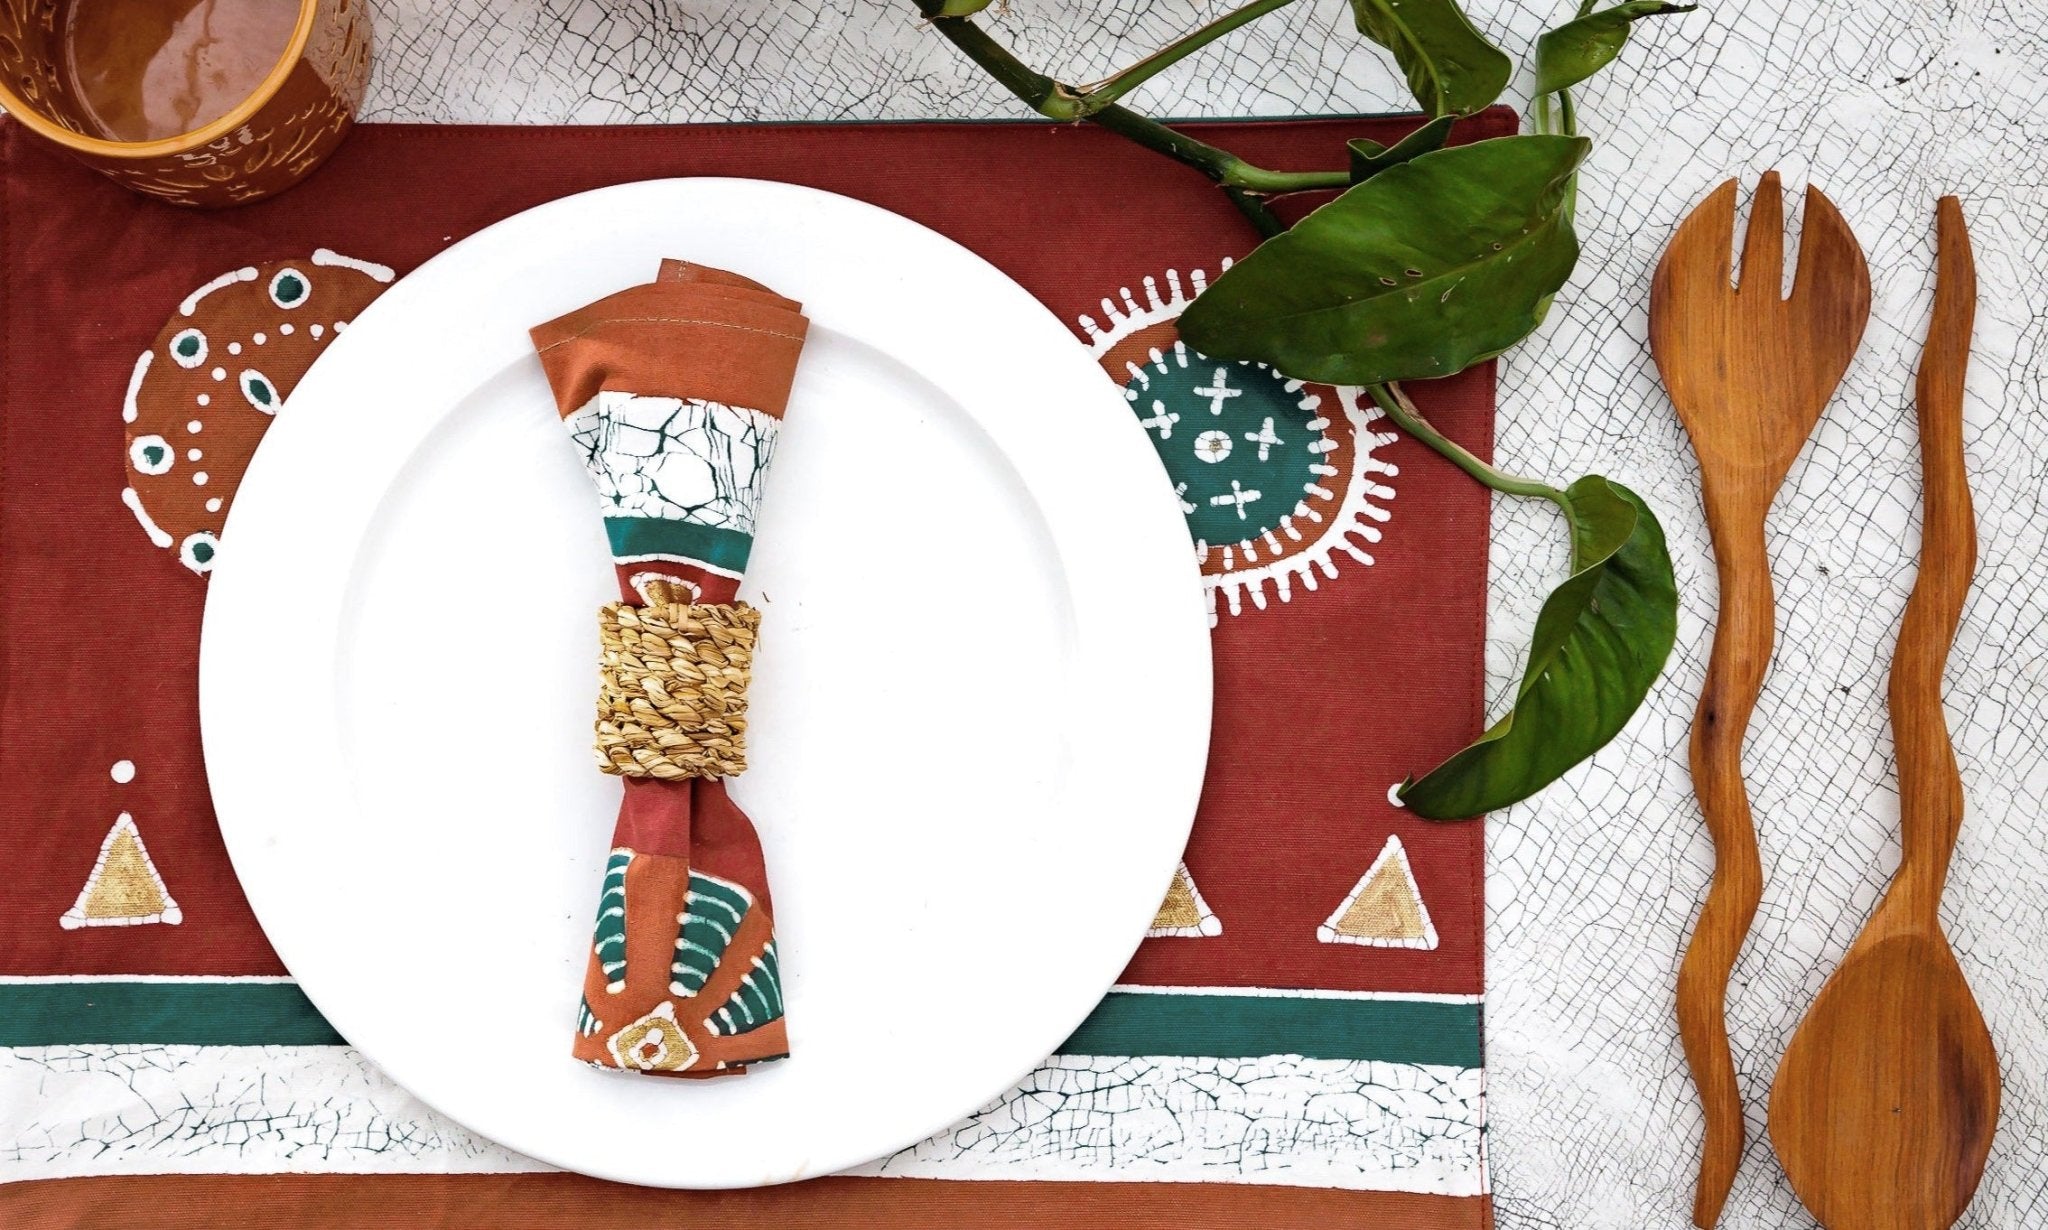 Kuosi Festive Napkin Set - Hand Painted by TRIBAL TEXTILES - Handcrafted Home Decor Interiors - African Made